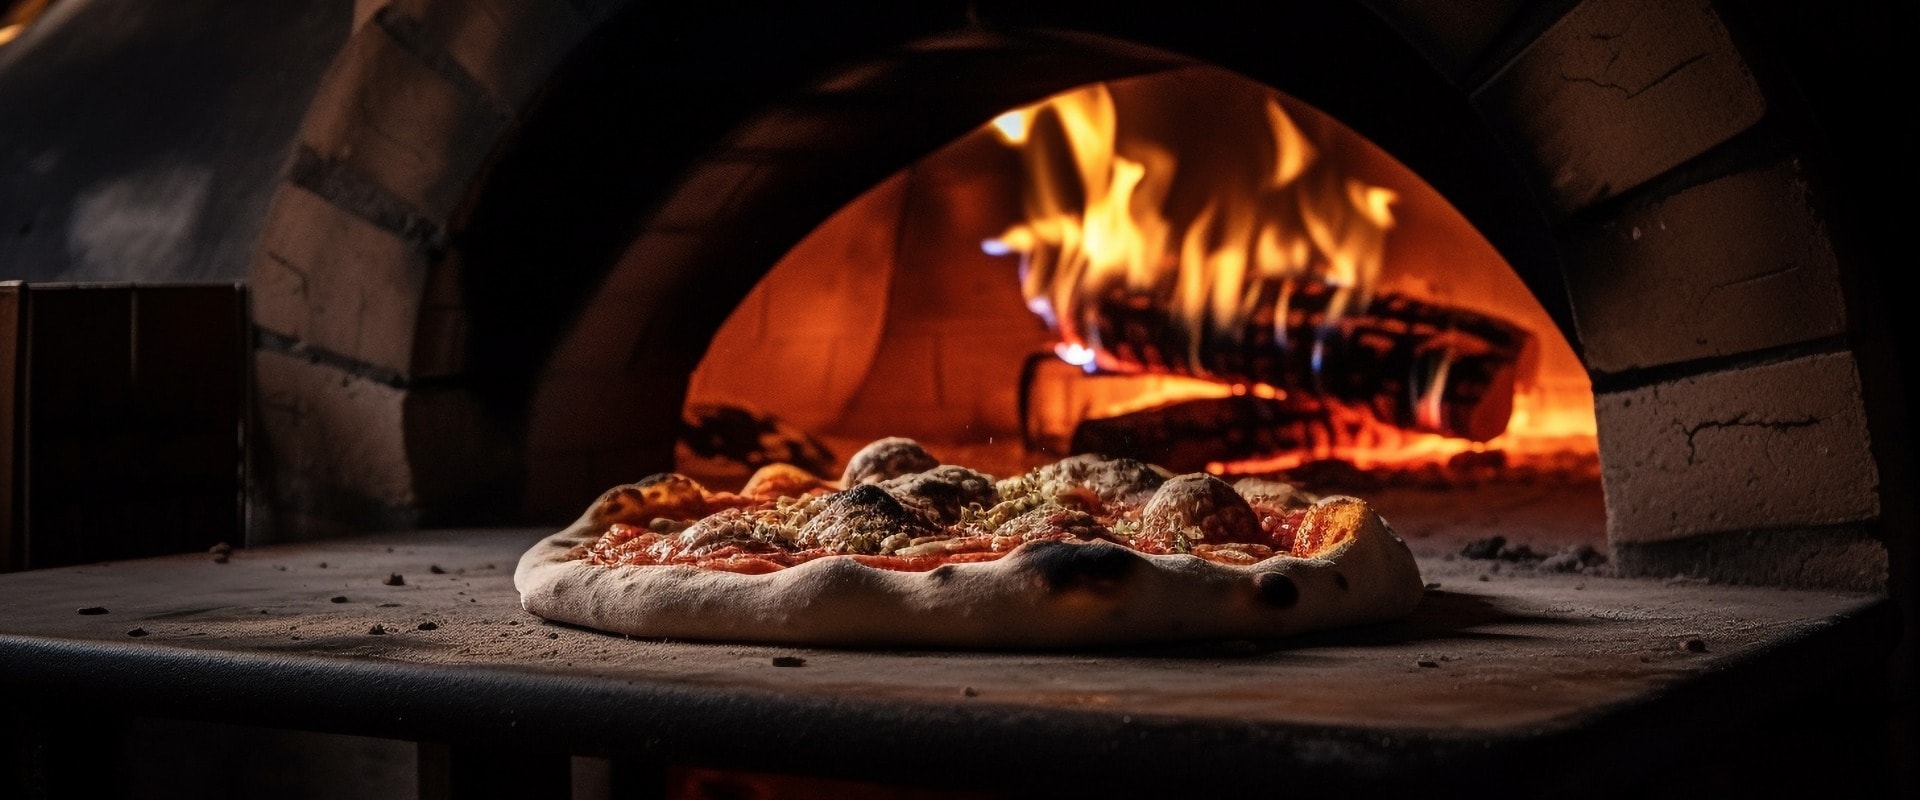 Baked gourmet pizza cooked in wood oven generated by AI